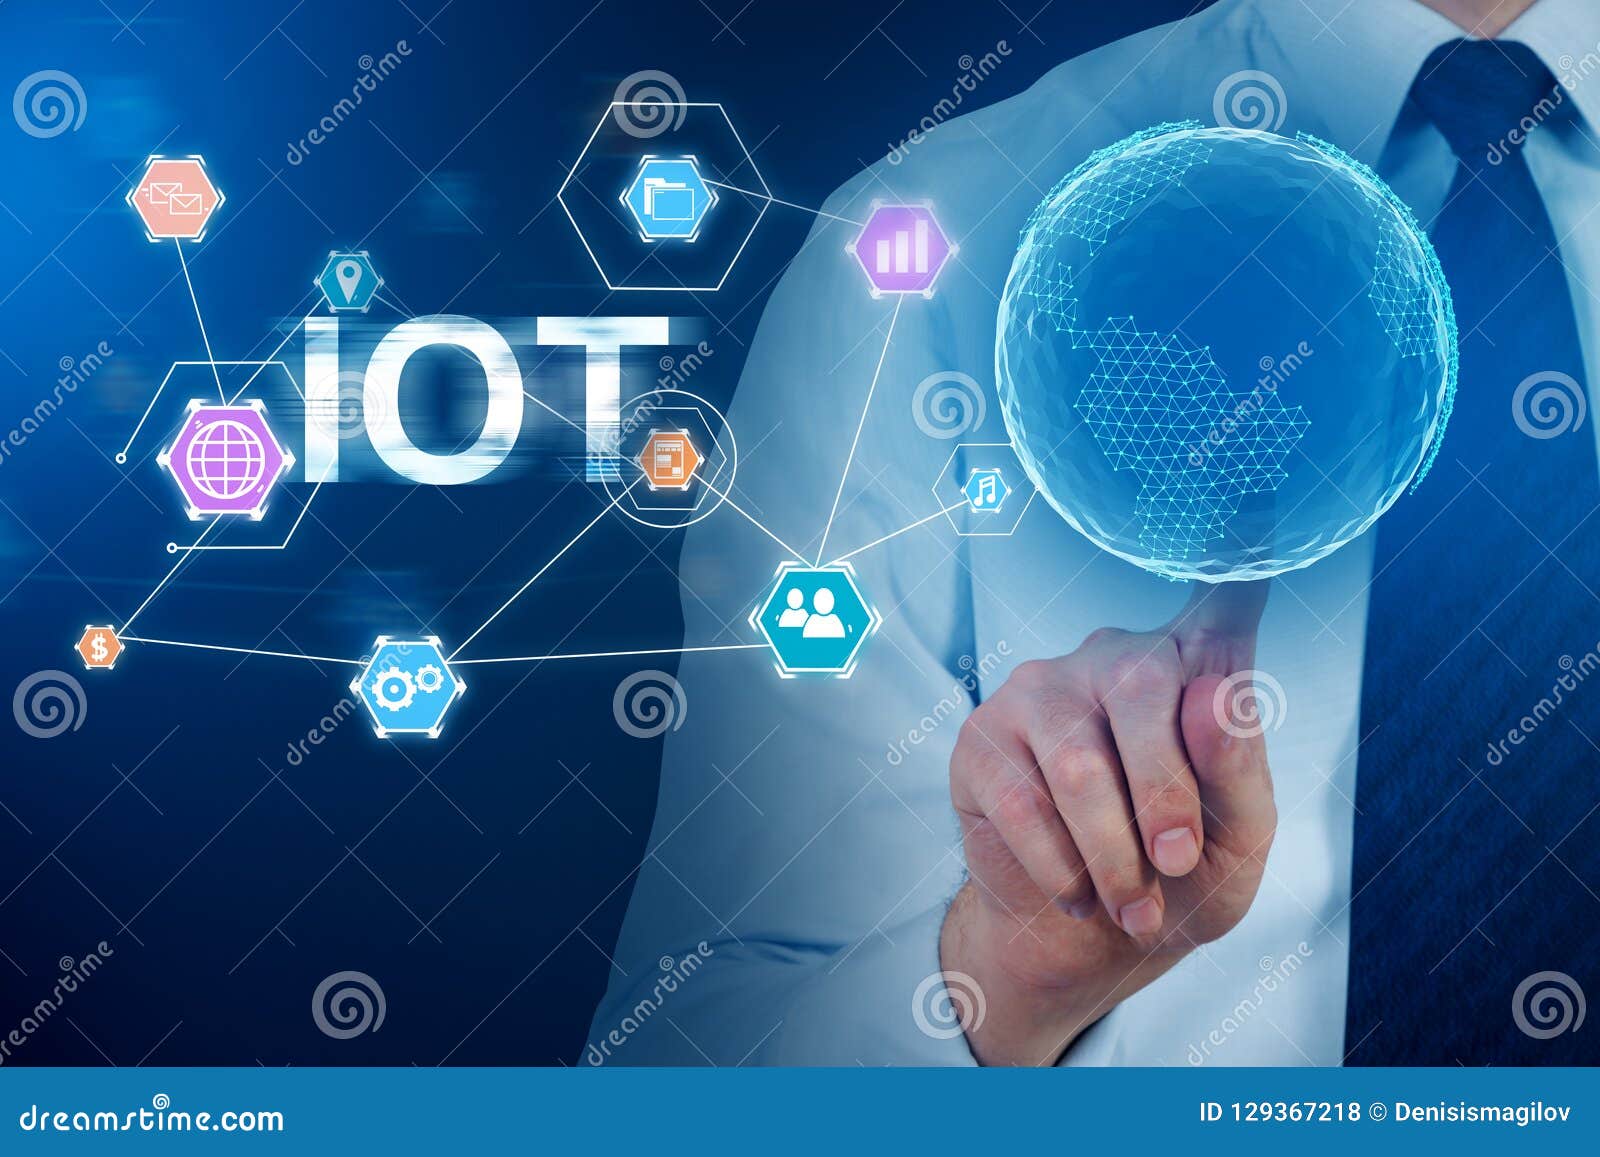 Businessman in Shirt Using Iot Interface Stock Photo - Image of ...